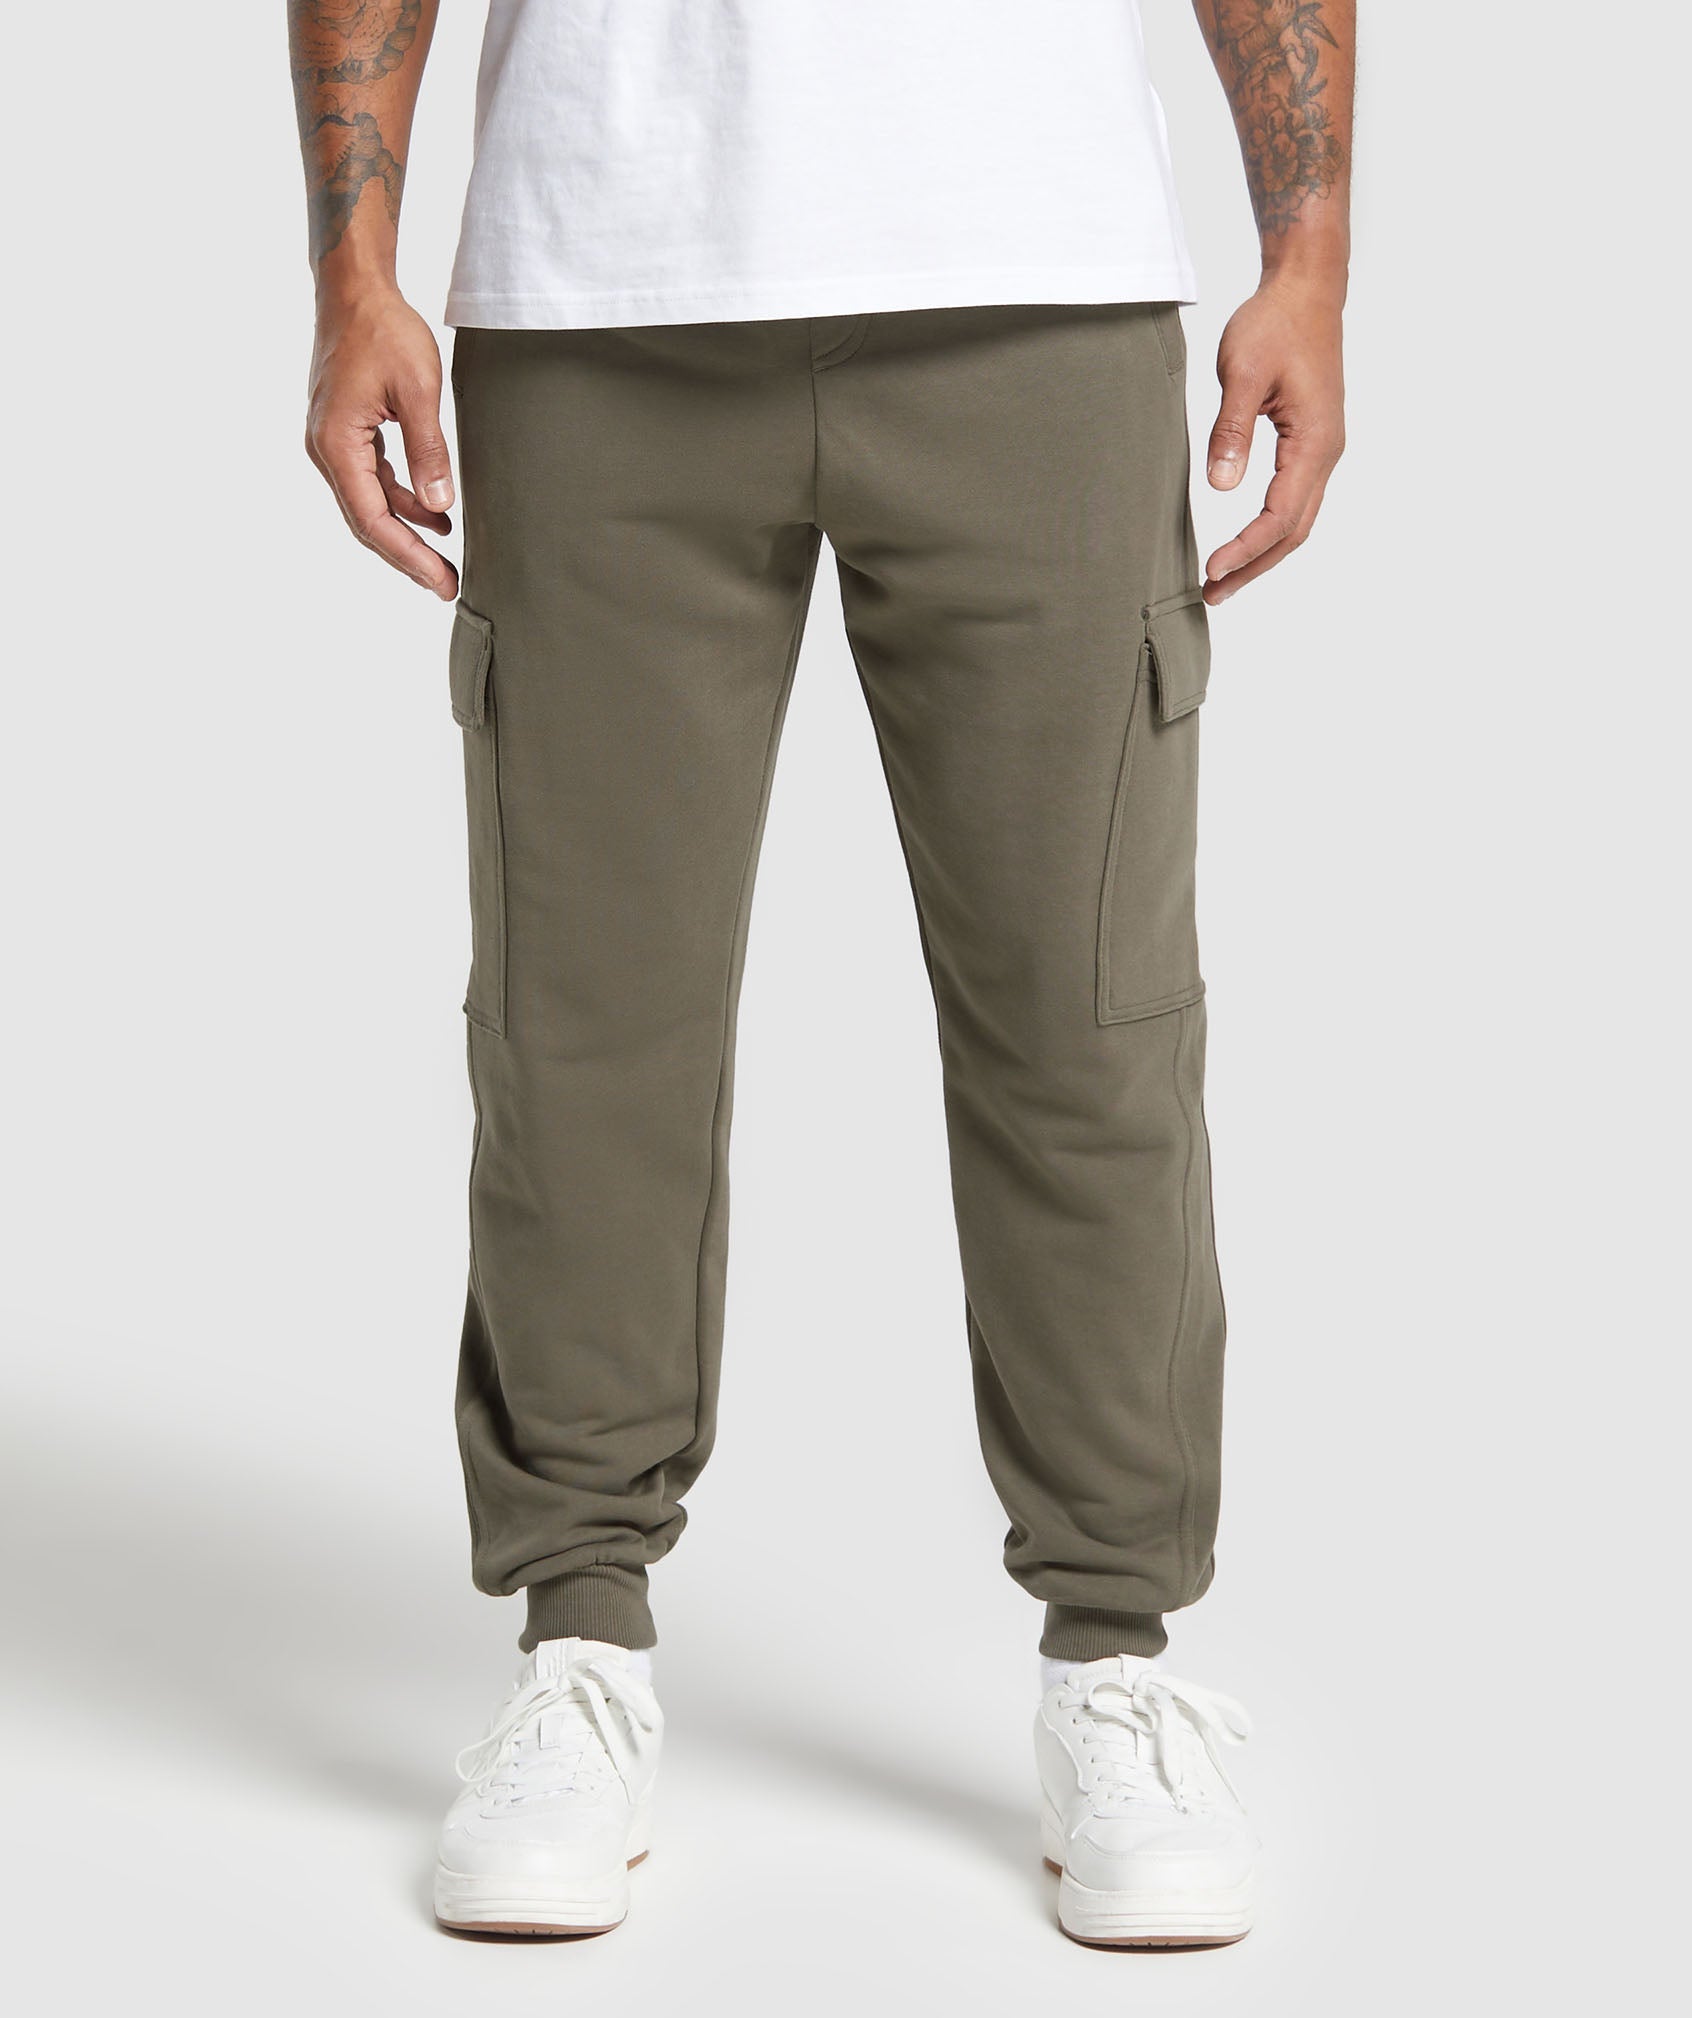 Rest Day Essentials Cargo Joggers in Camo Brown